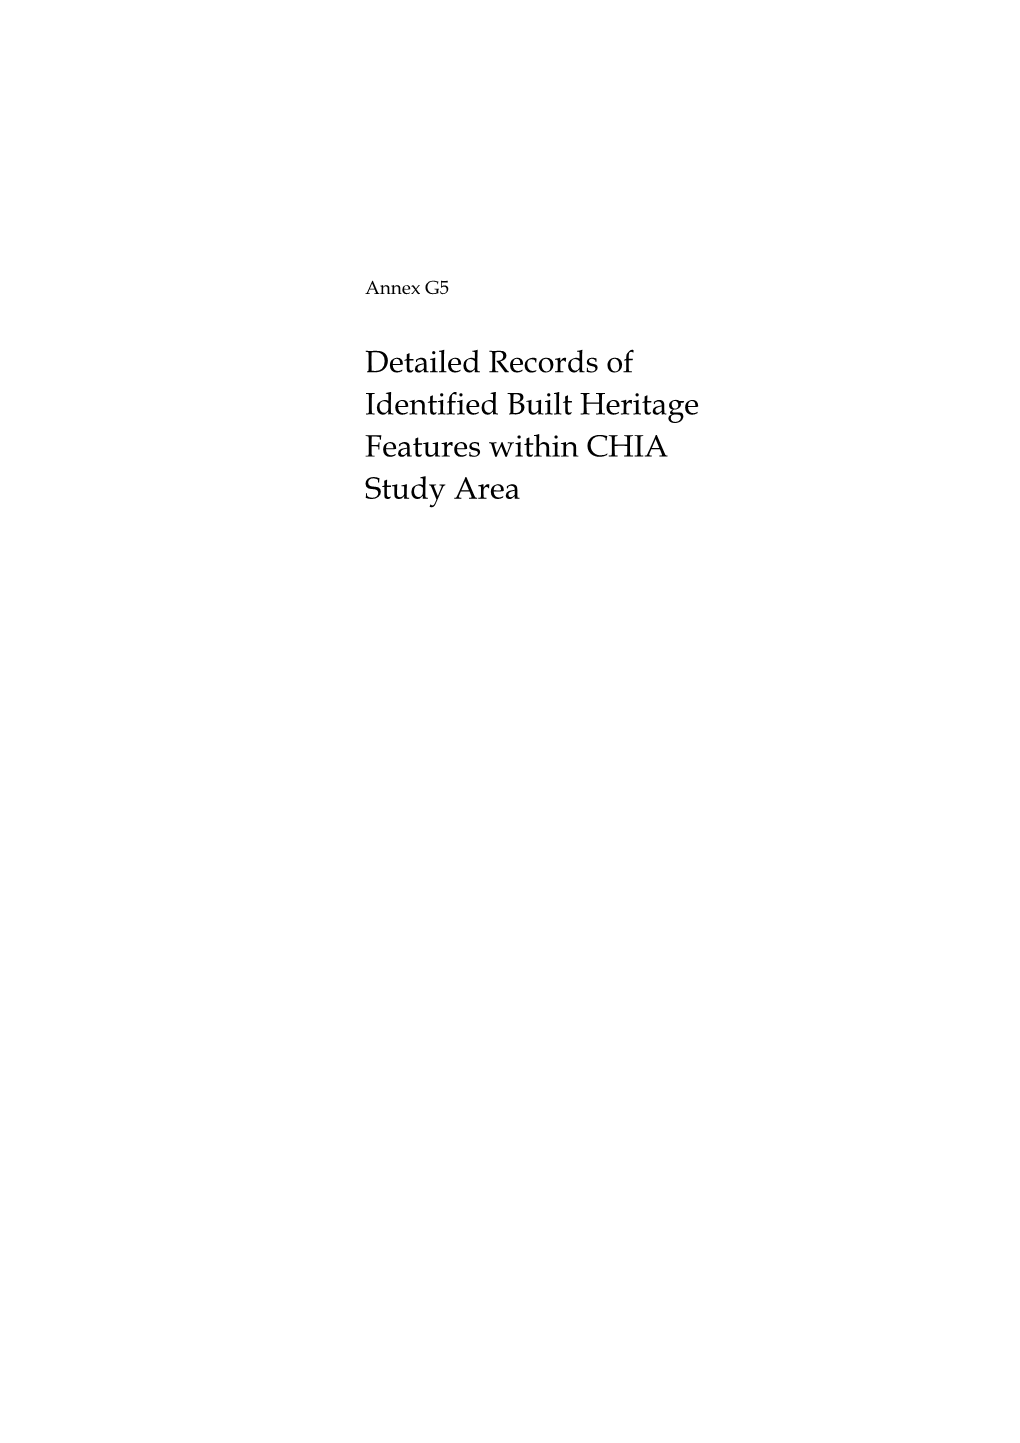 Detailed Records of Identified Built Heritage Features Within CHIA Study Area